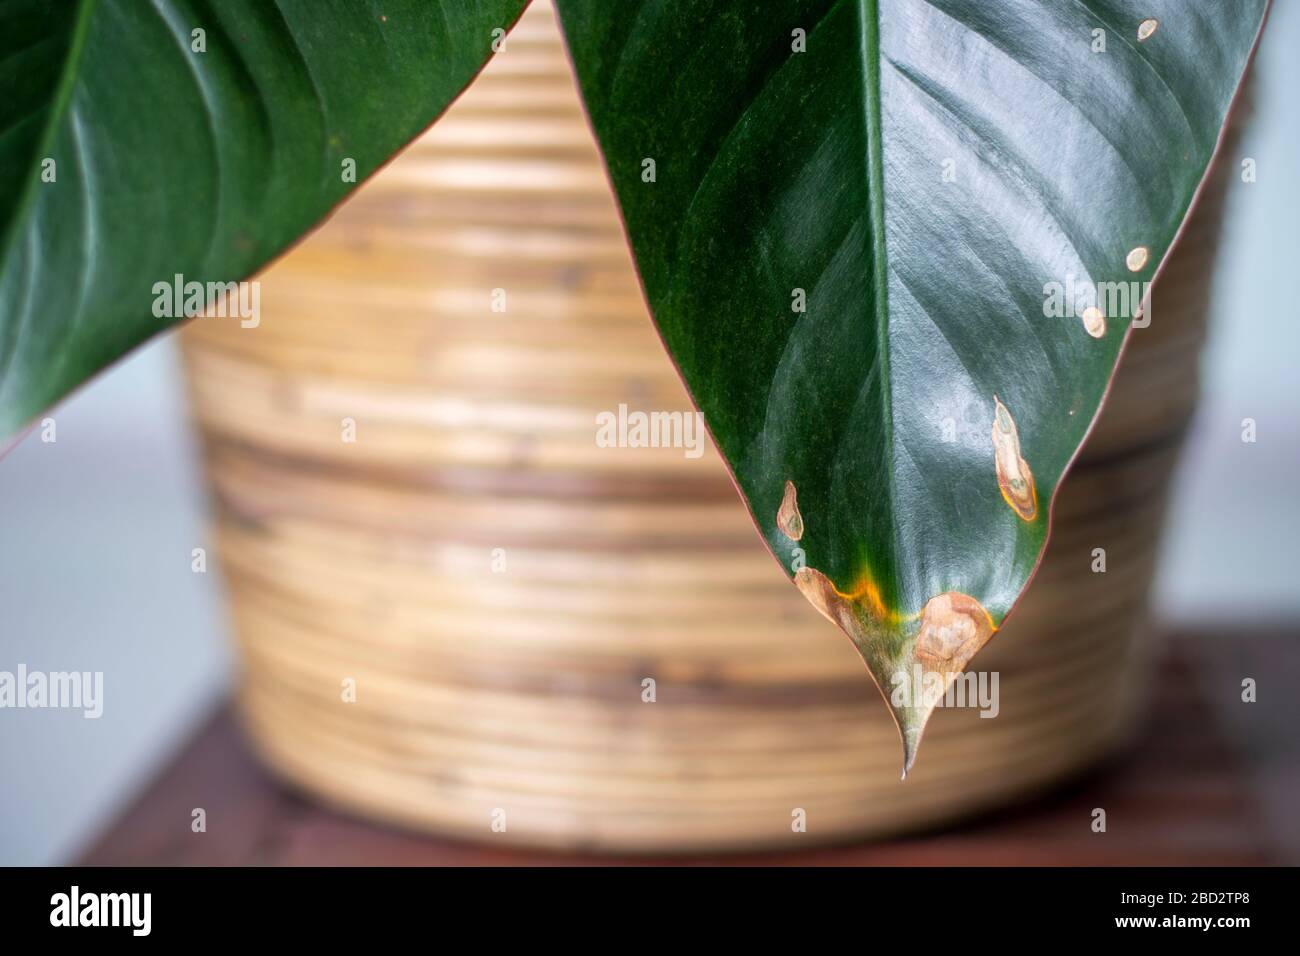 Yellowing spots on leaves on houseplant. Sick house plant. Dehydration plant by giving too little water. Stock Photo